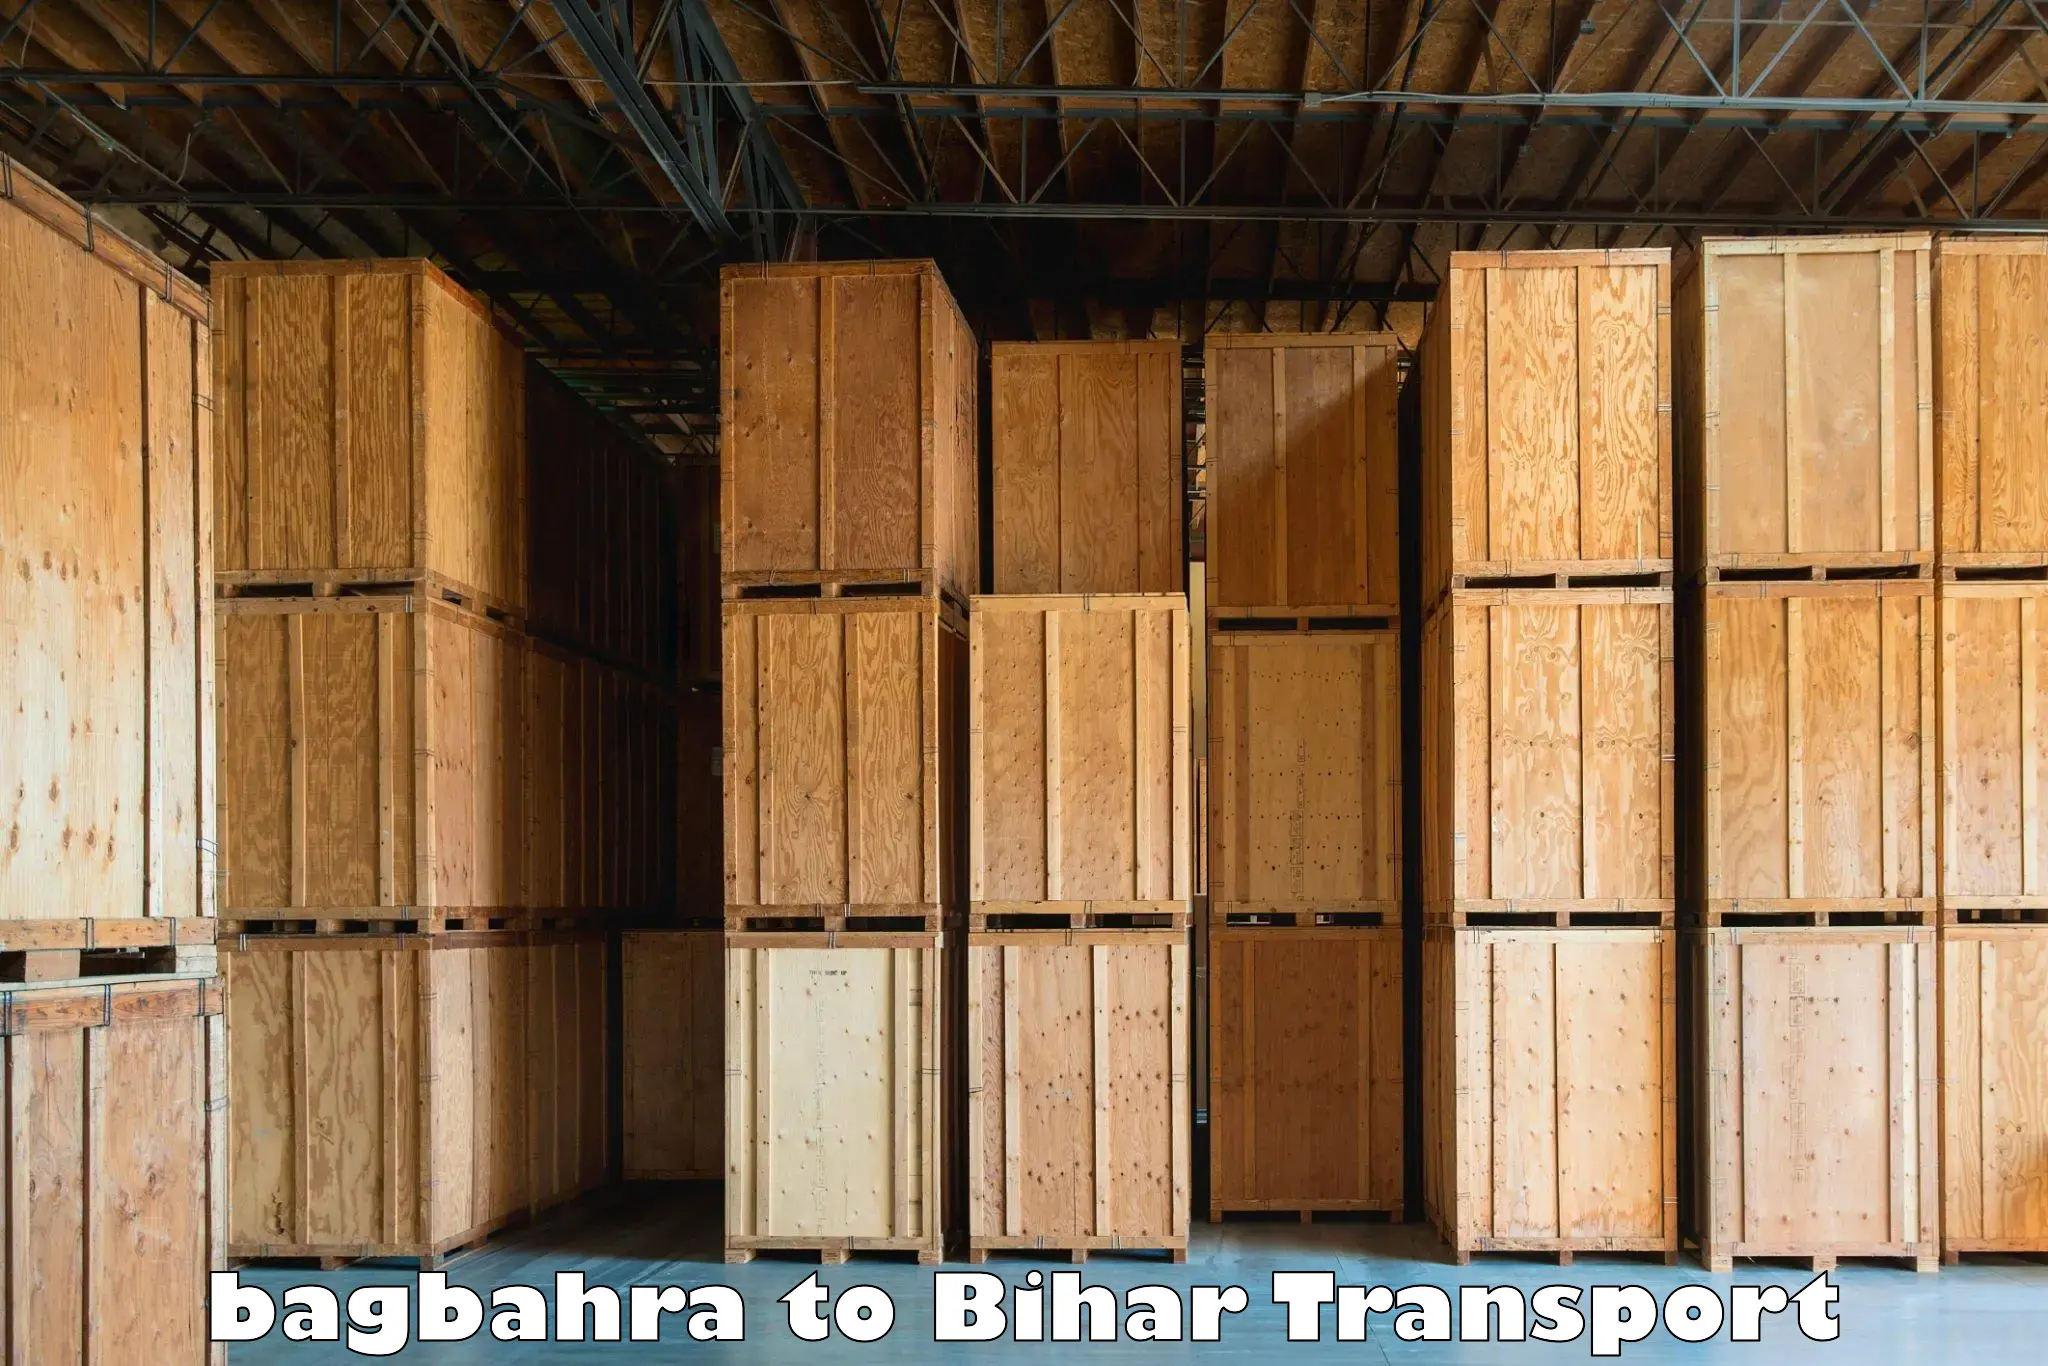 Truck transport companies in India bagbahra to Kochas